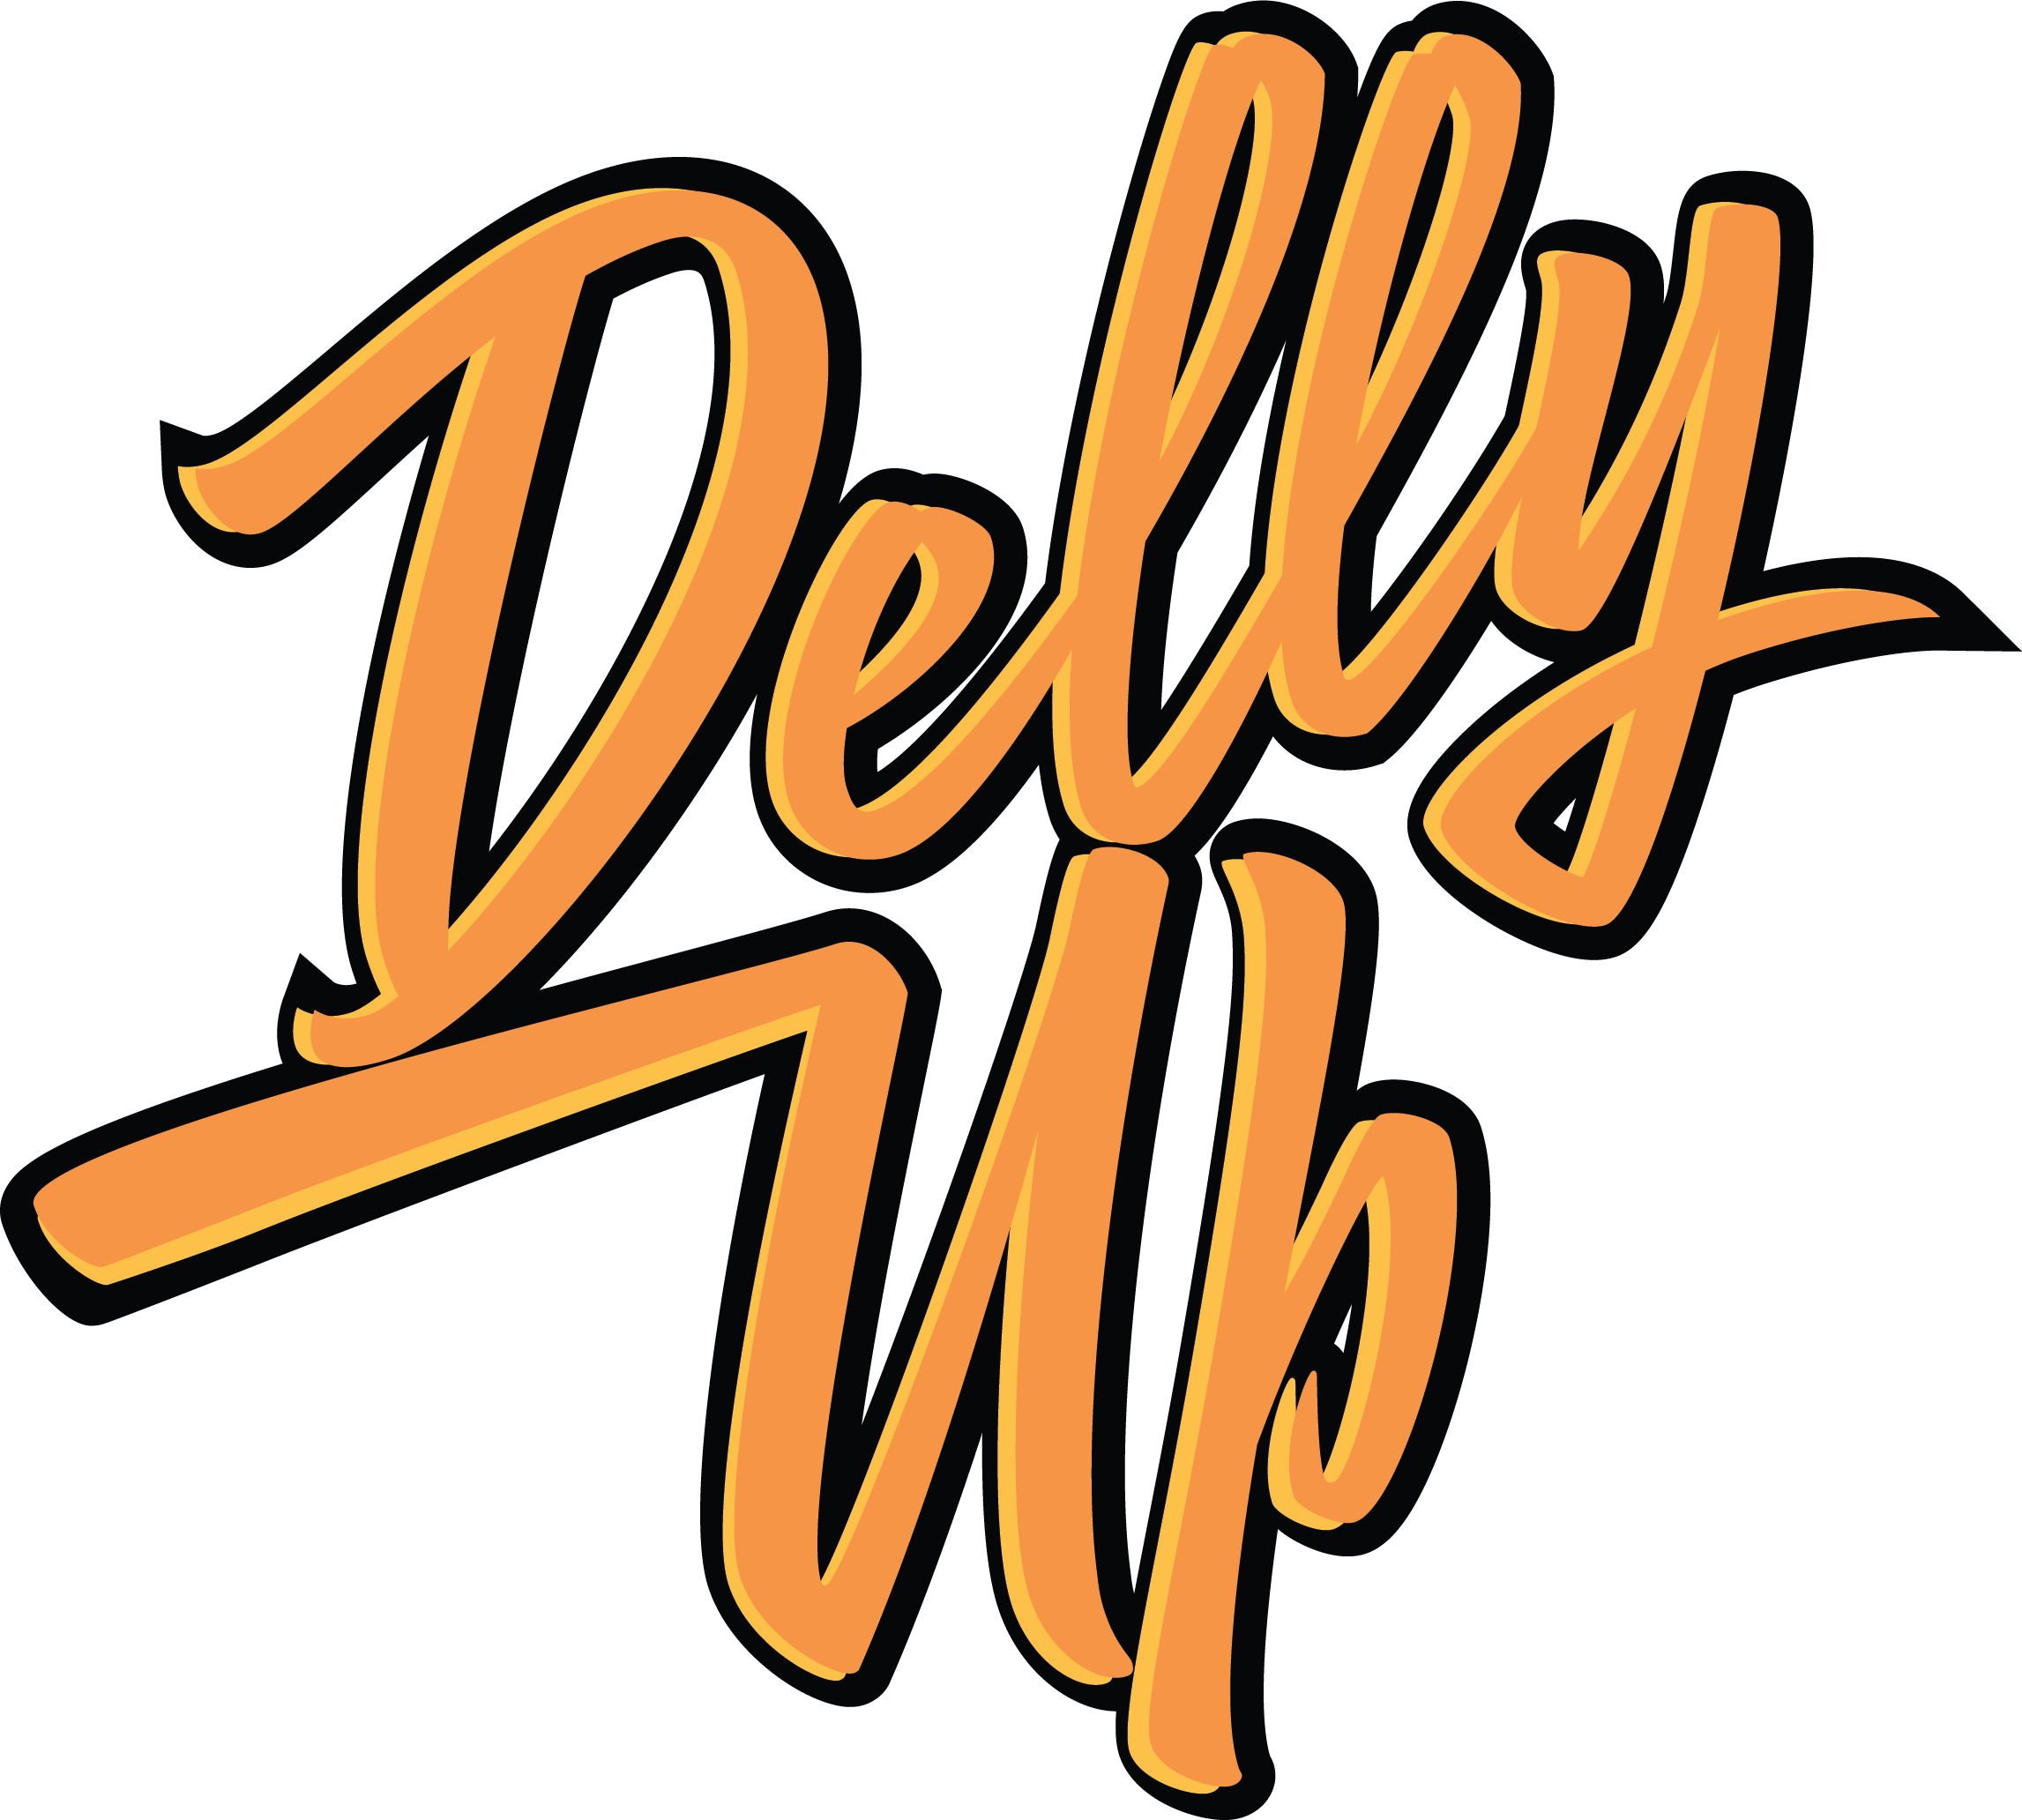 Delly Up 421 W. Main St.